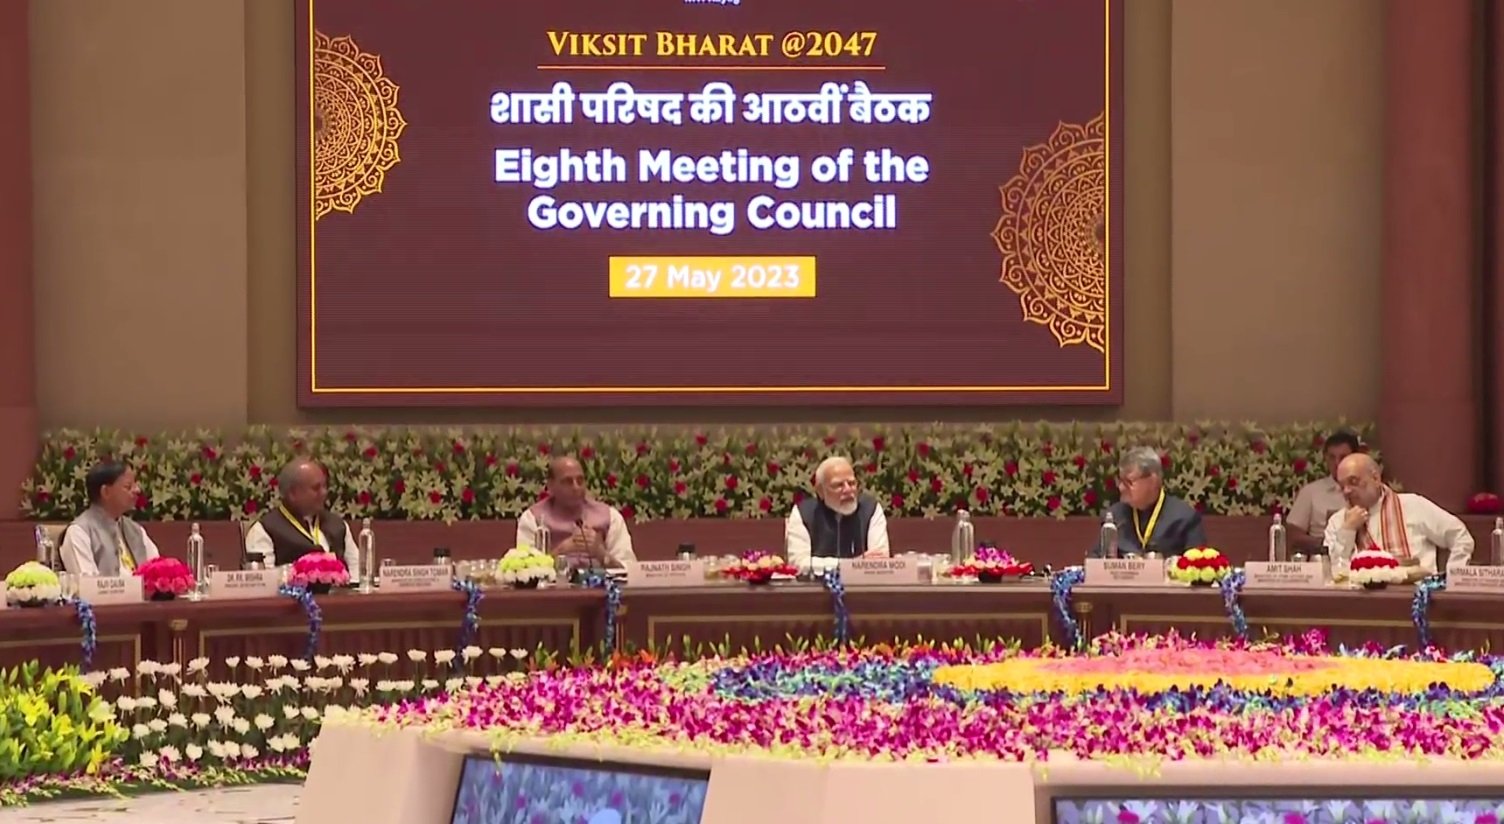 Visuals of the Niti Aayog Governing Council meeting underway